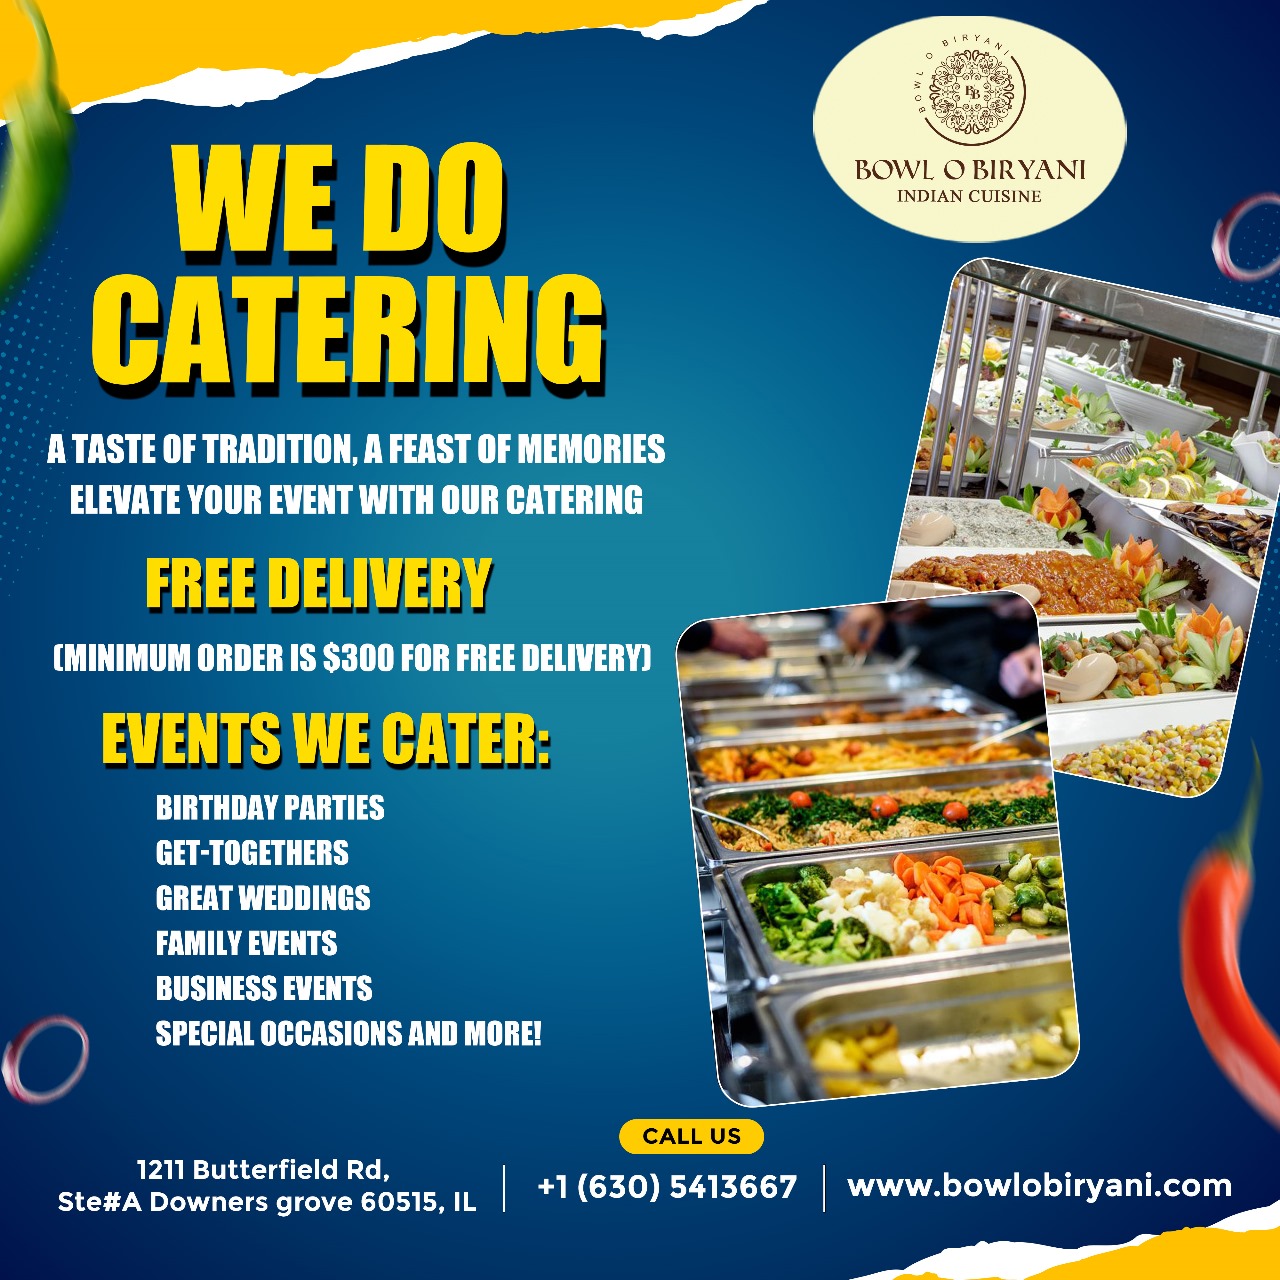 We cater to all your event needs. Take advantage of free delivery!